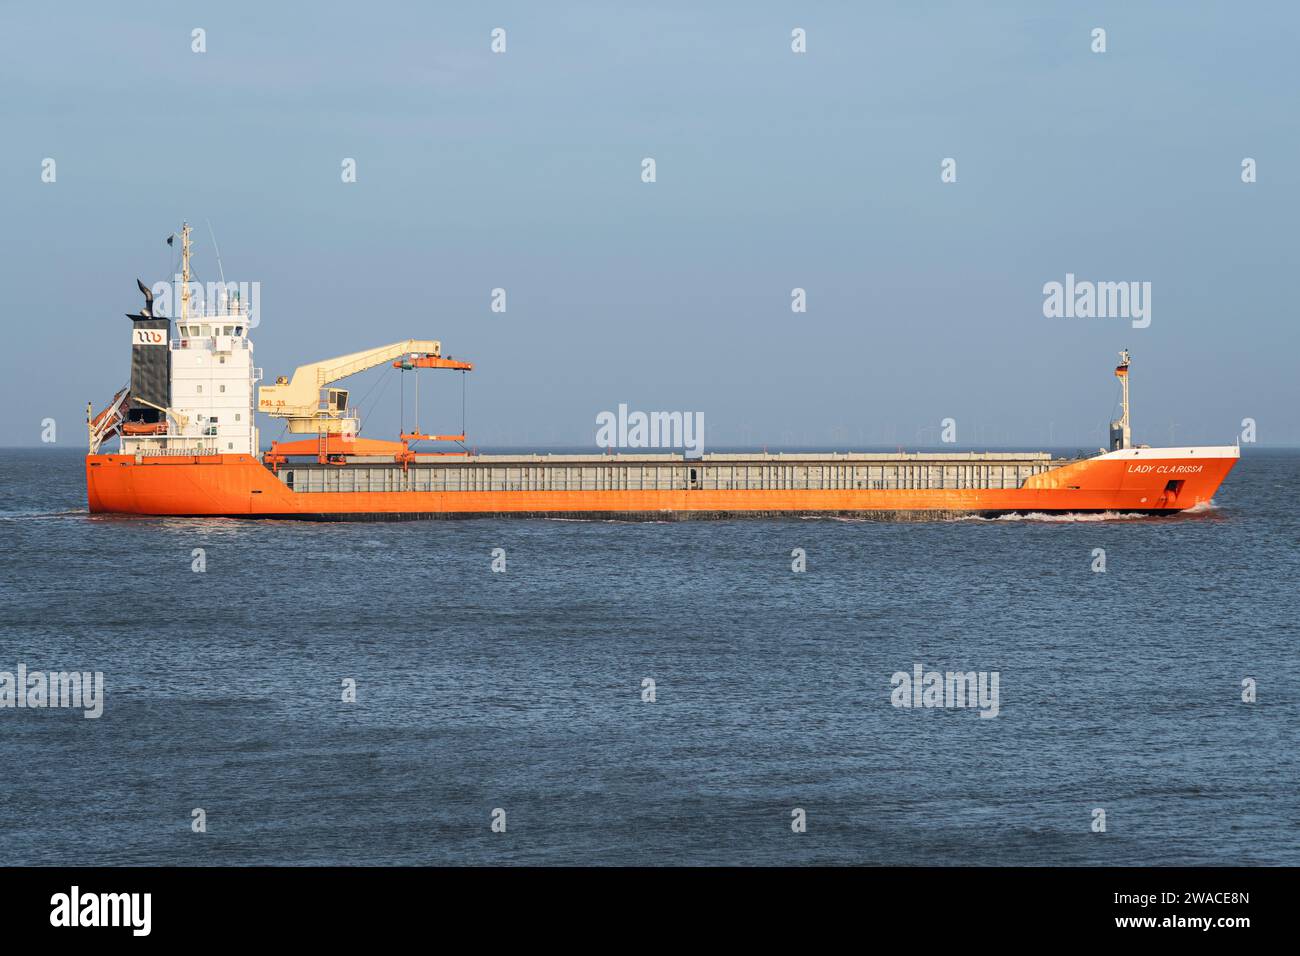 Wijnne Barends general cargo vessel Lady Clarissa on the river Elbe Stock Photo